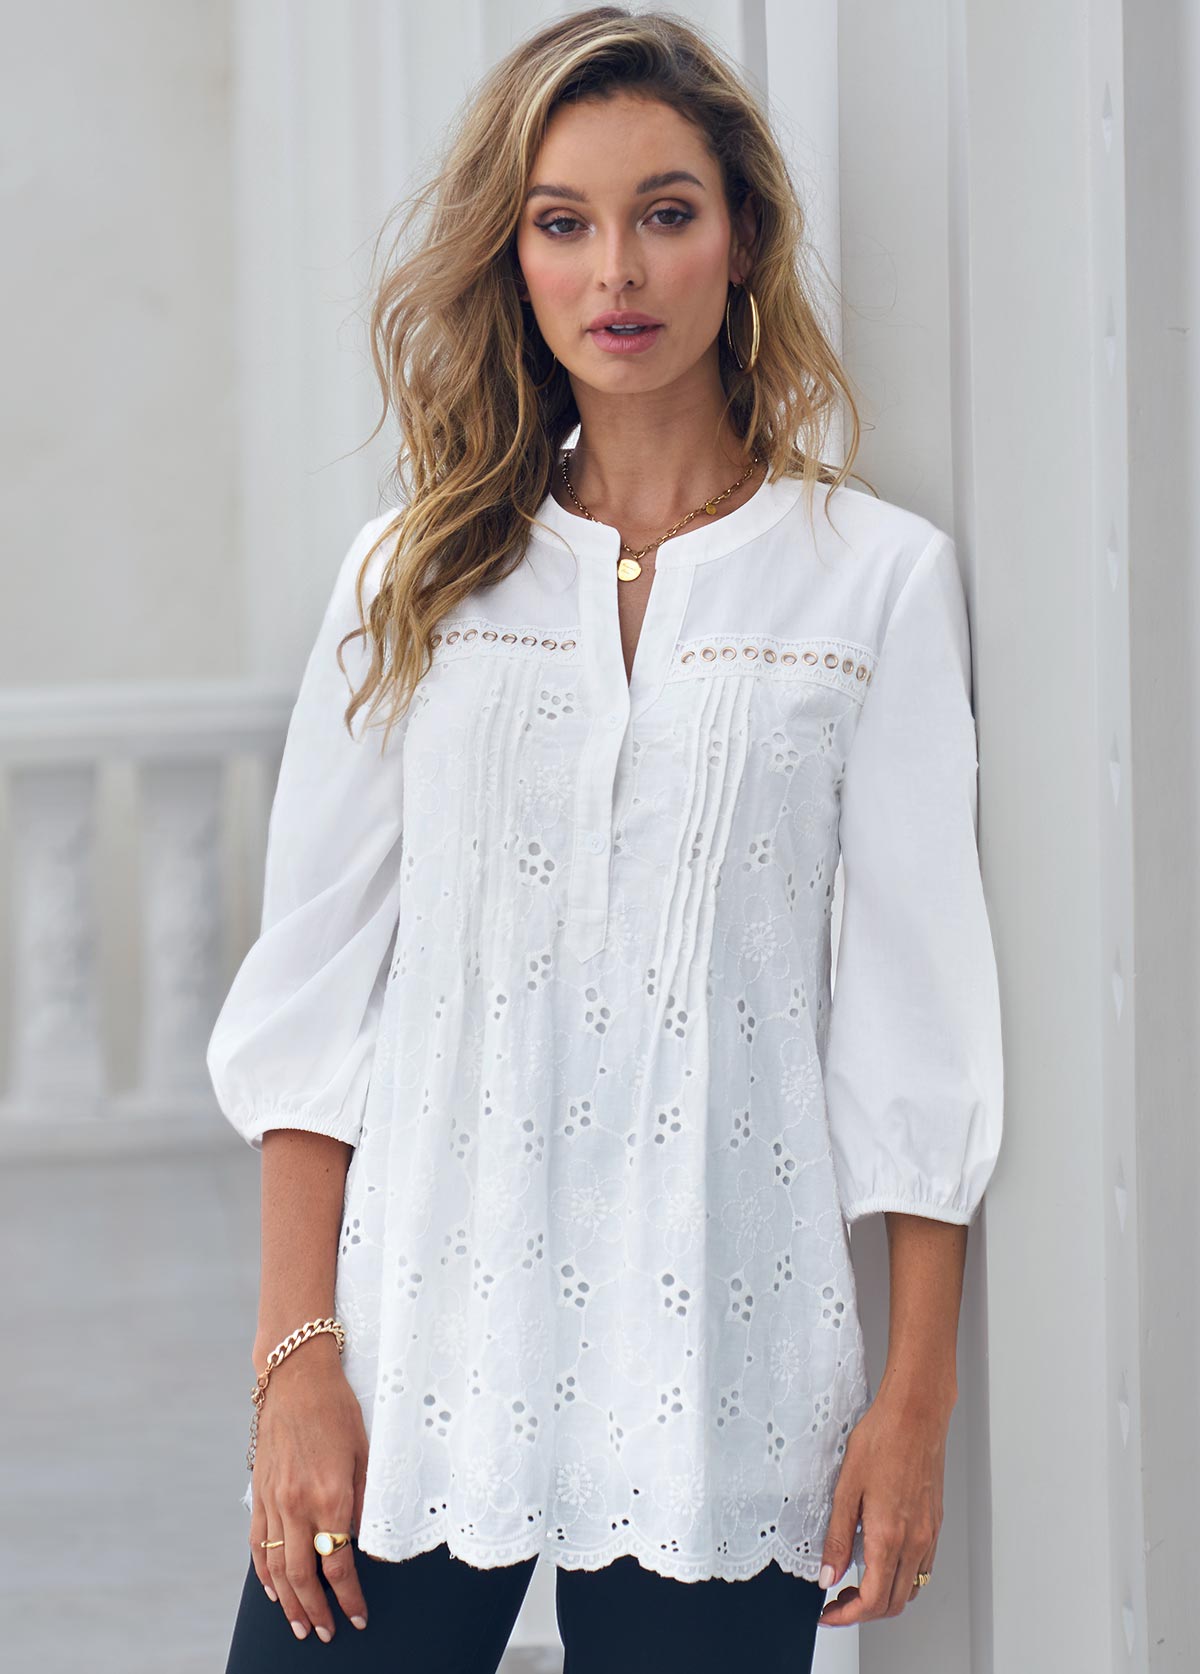 Embroidered Hollow Out Split Neck White Blouse | modlily.com - USD 39.98